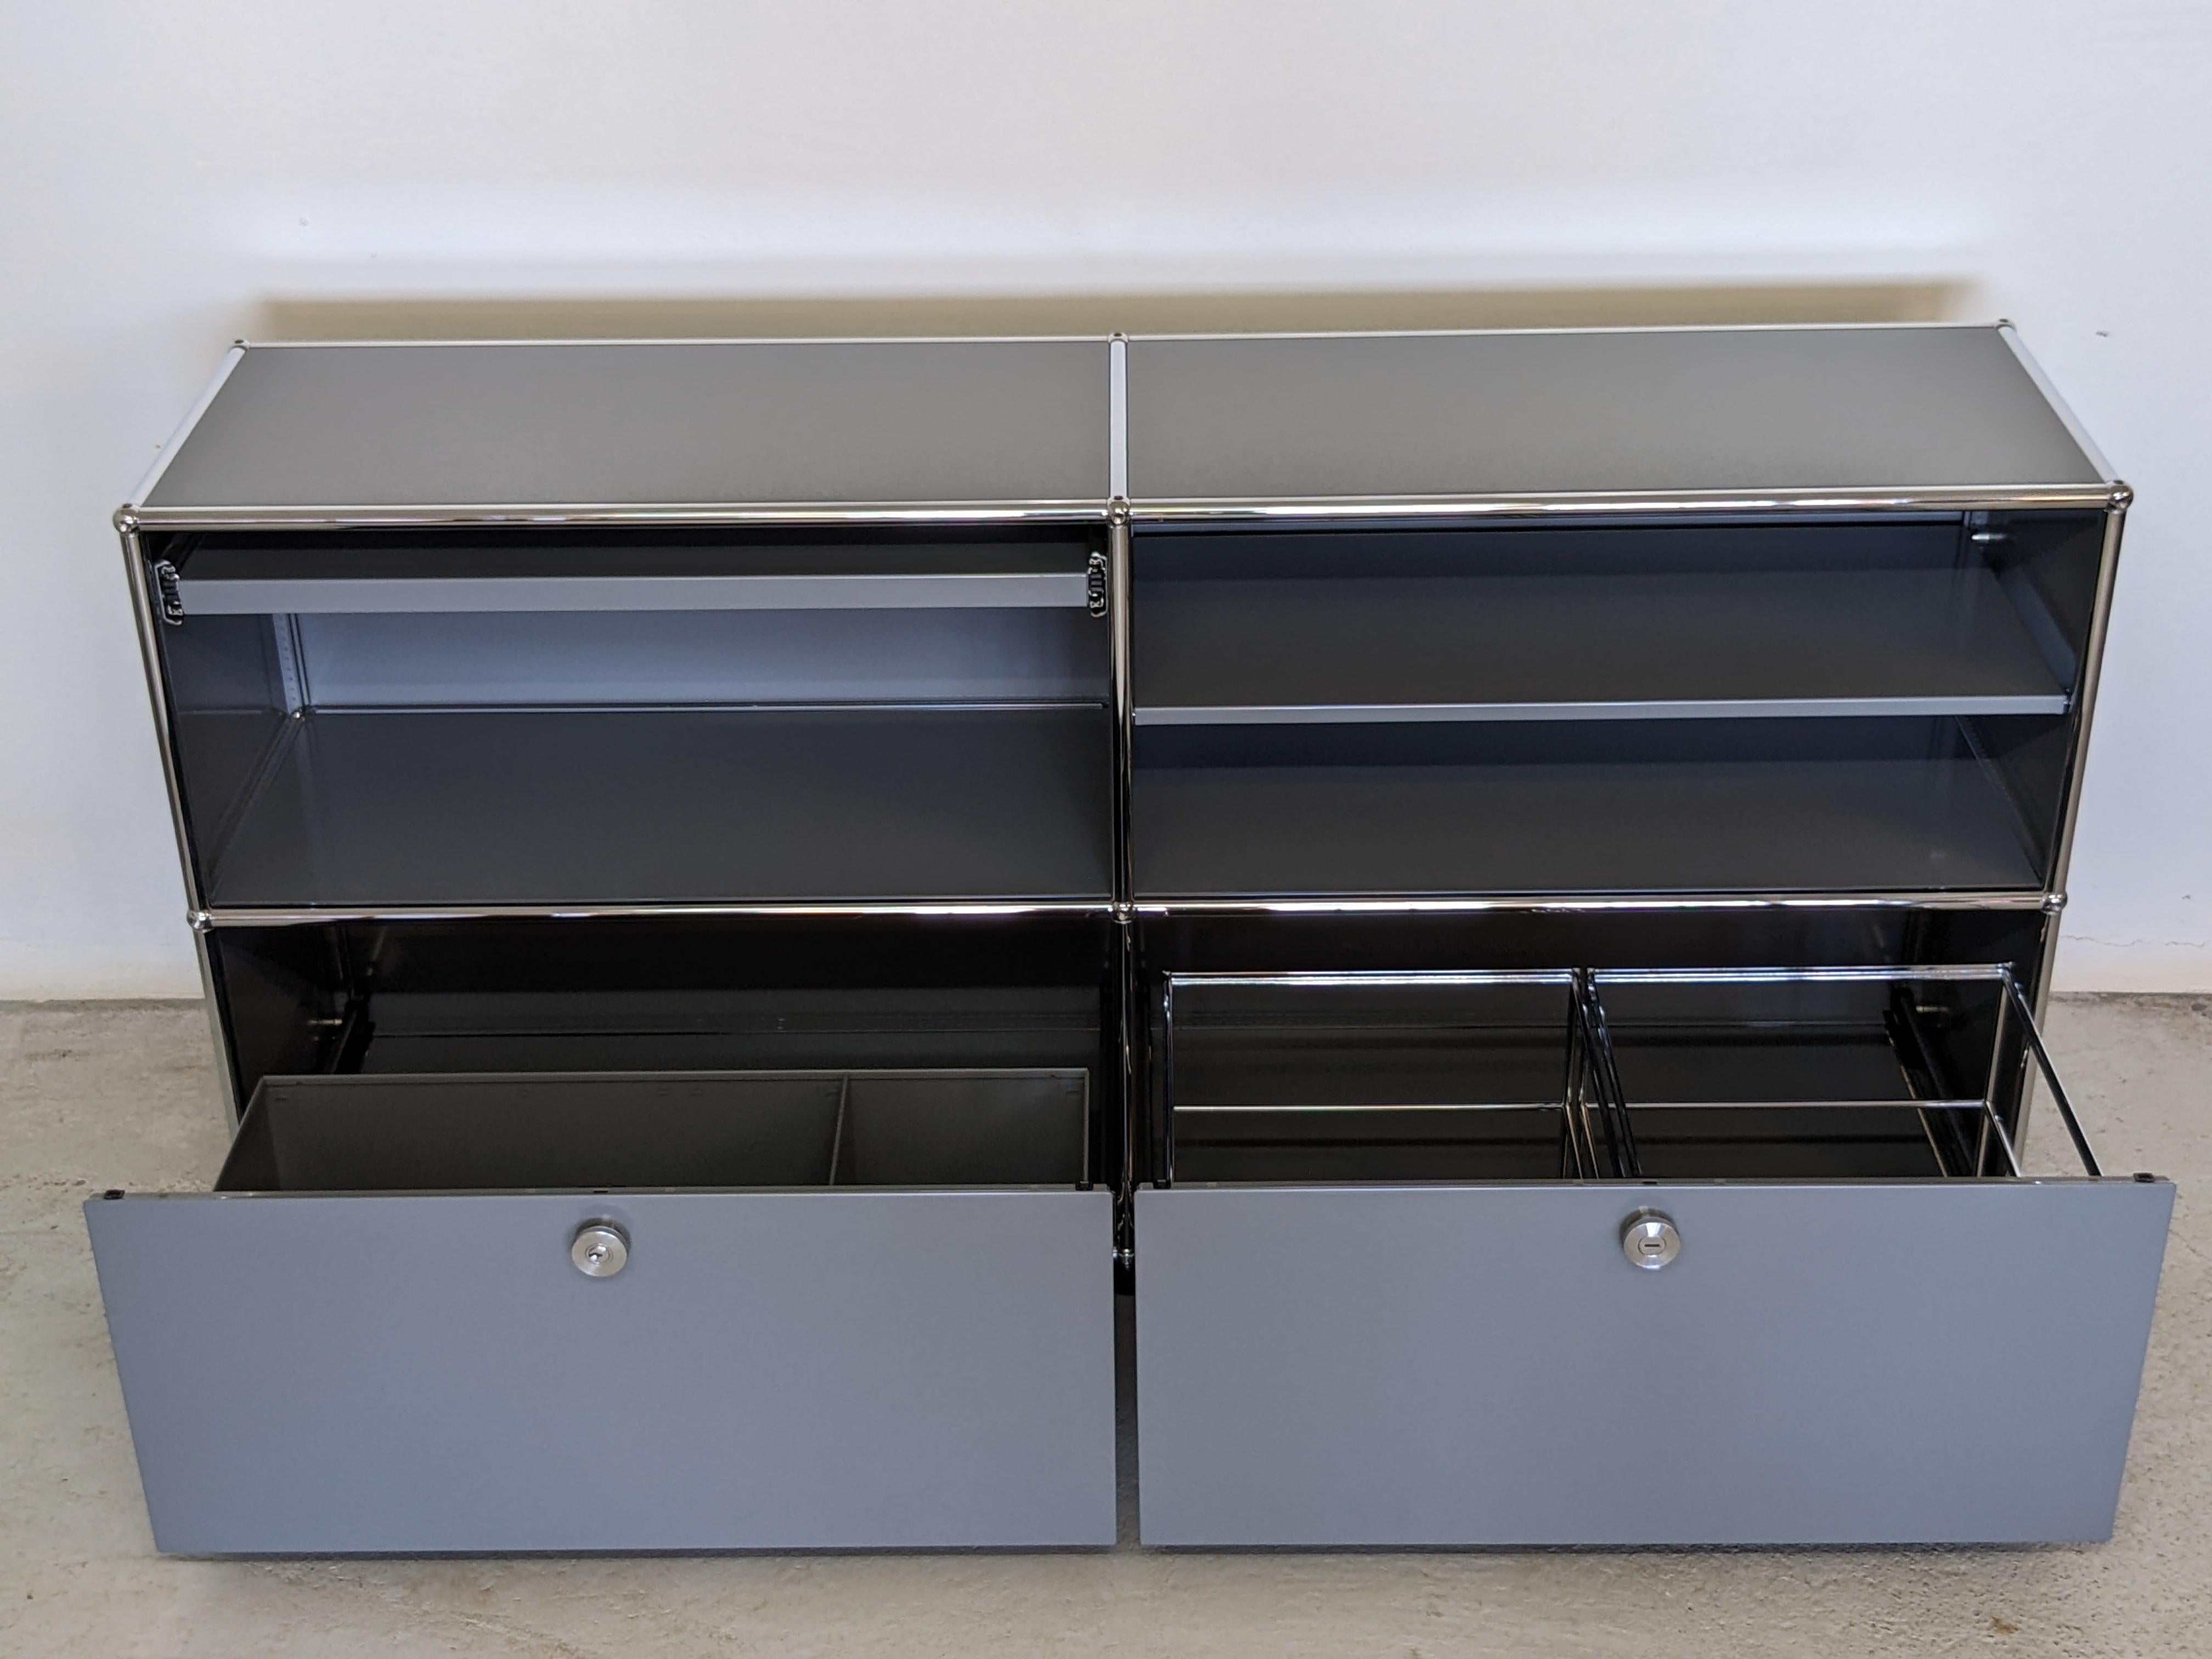 Contemporary USM Haller Set of Two Anthracite Storage Systems, Credenza or Sideboard